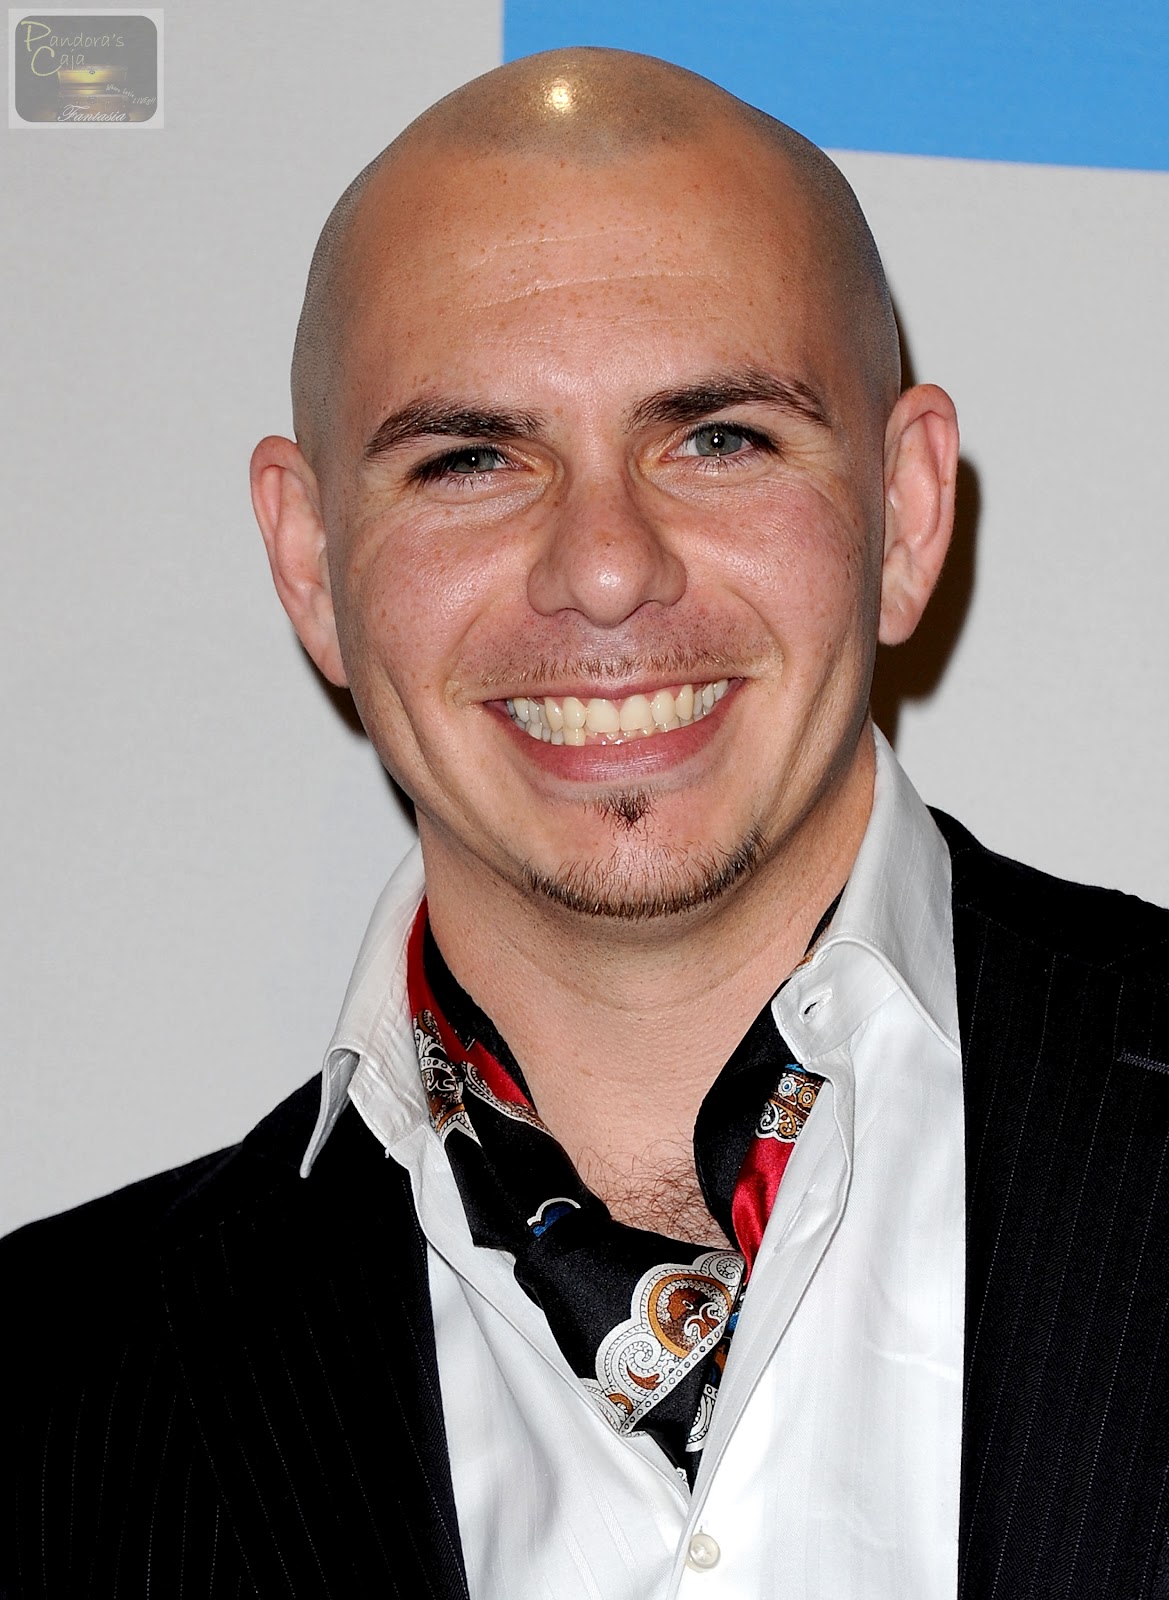 Pitbull Rapper Wallpapers amp Pictures Hd Wallpapers